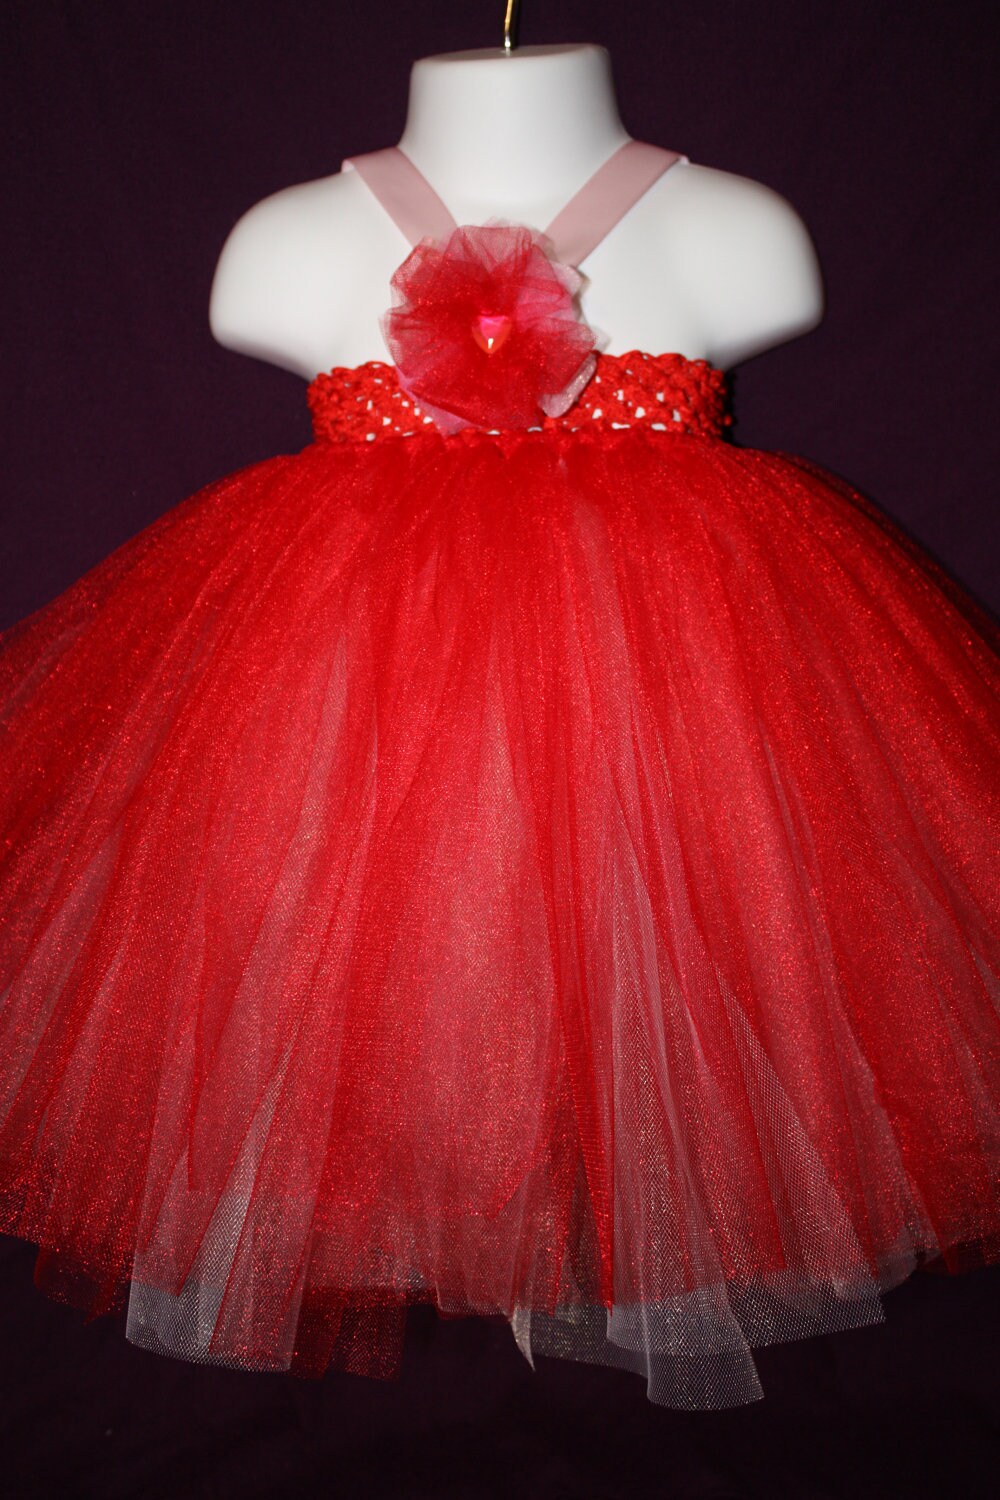 Items similar to Red Tutu Dress & Tutu: Christmas, Valentine's Day and ...